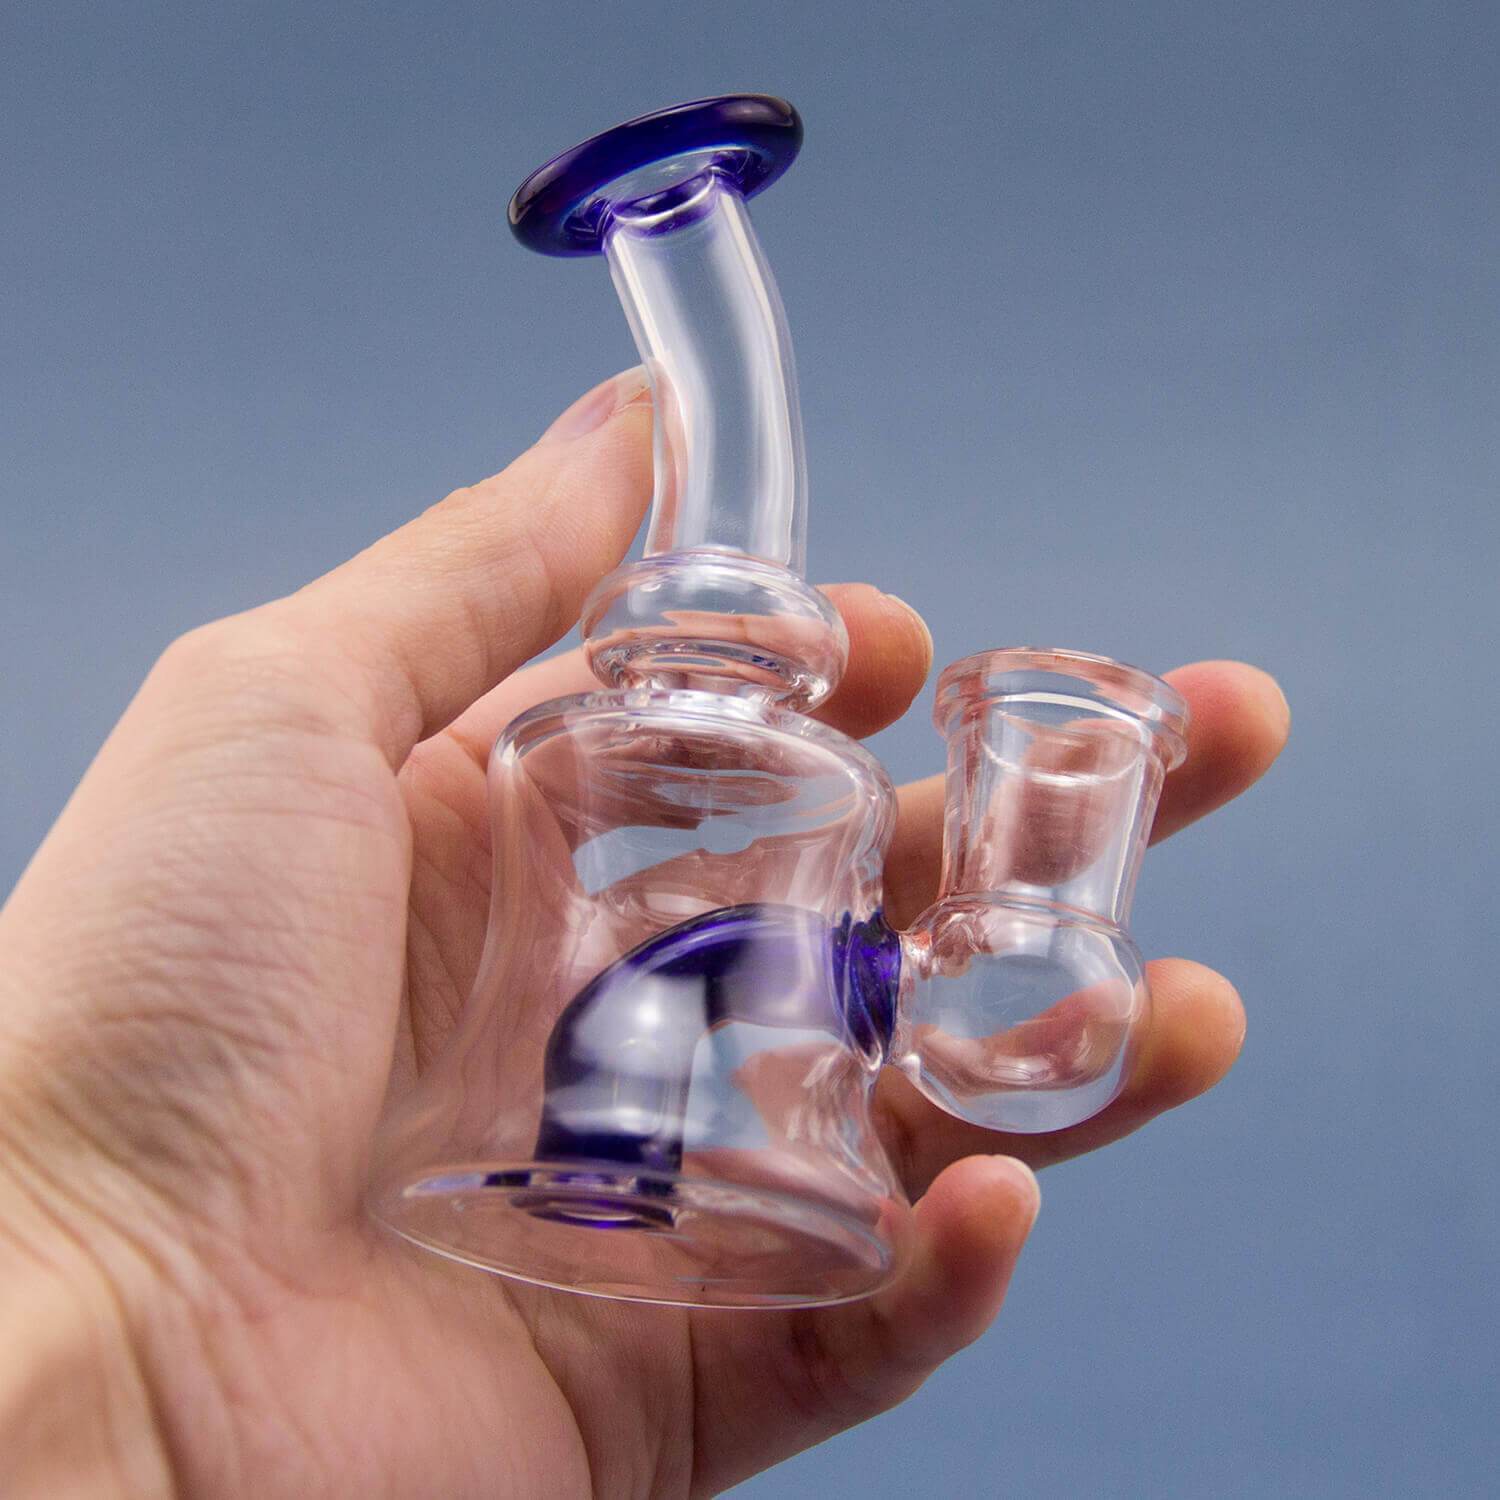 Top 8 Mini Rigs for Dabs